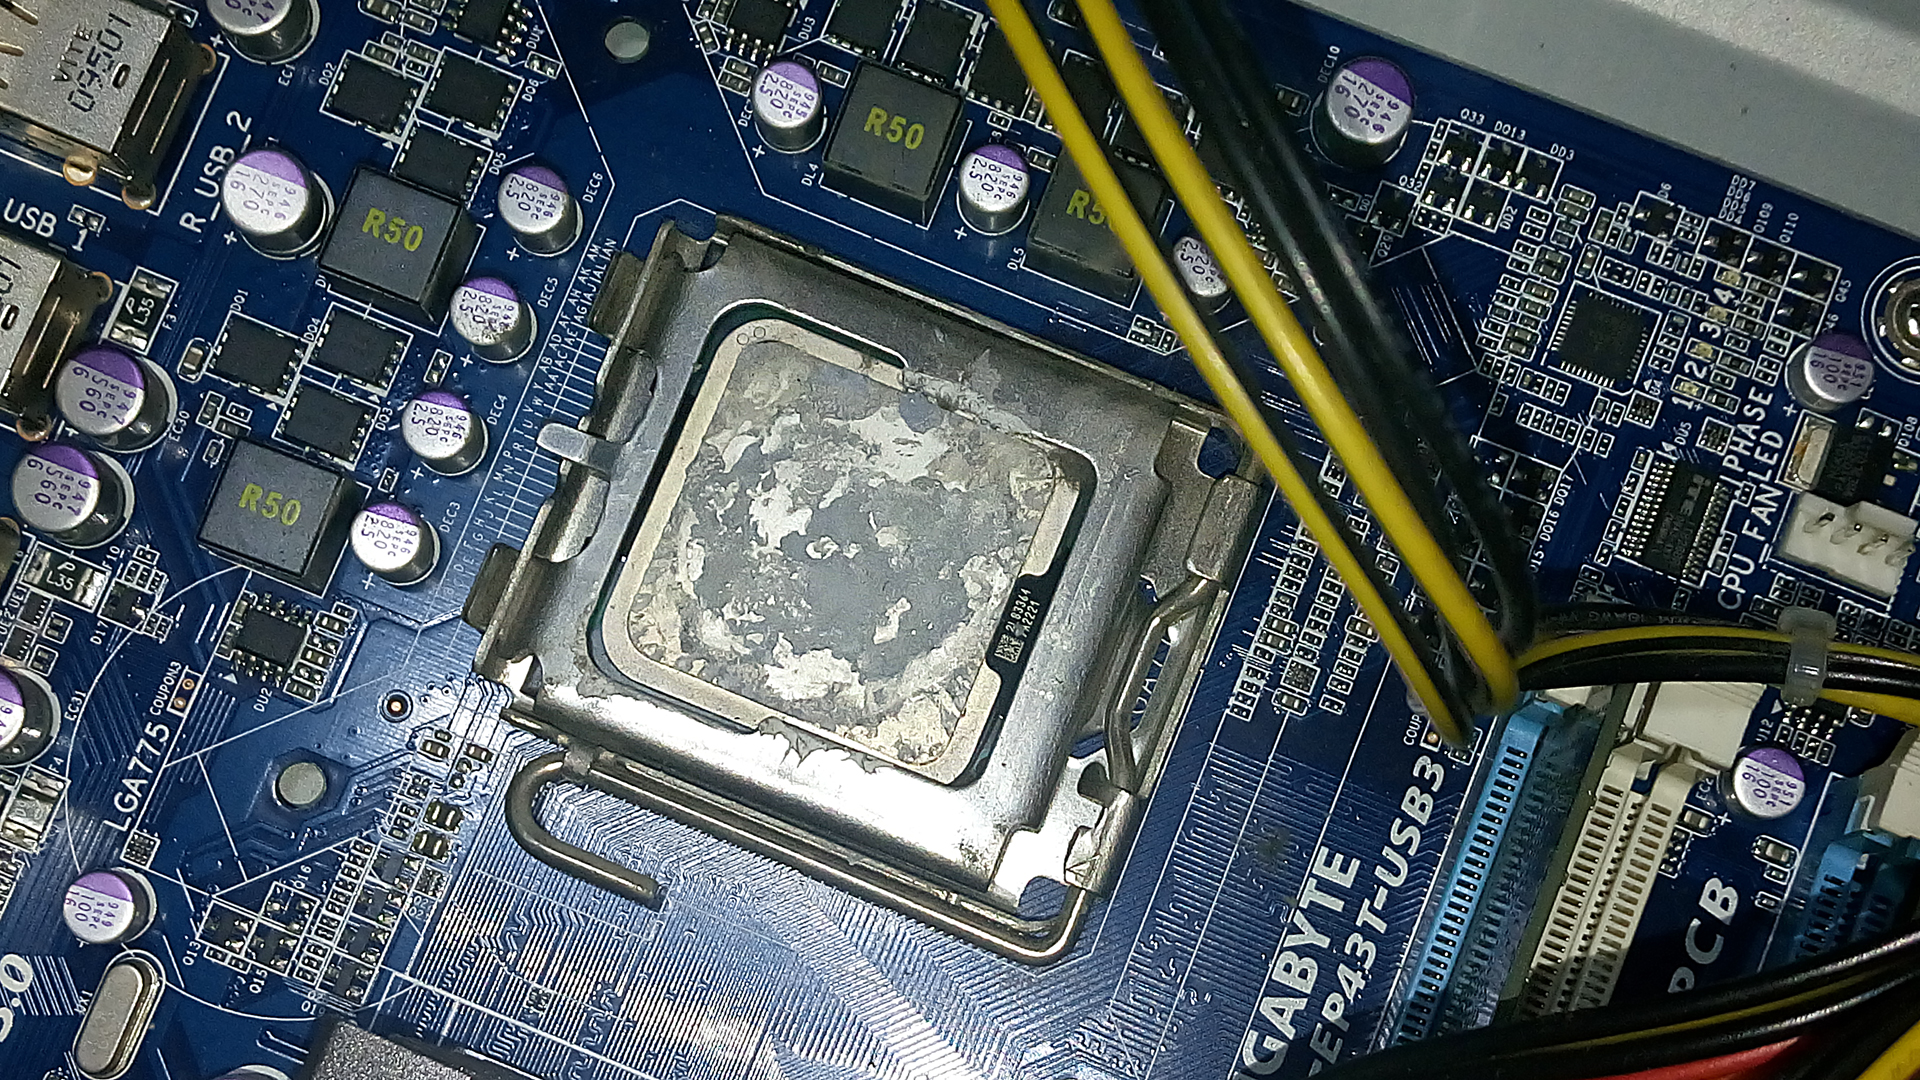 Apply a small amount of new thermal paste to the processor
Replace the heat sink and outer casing